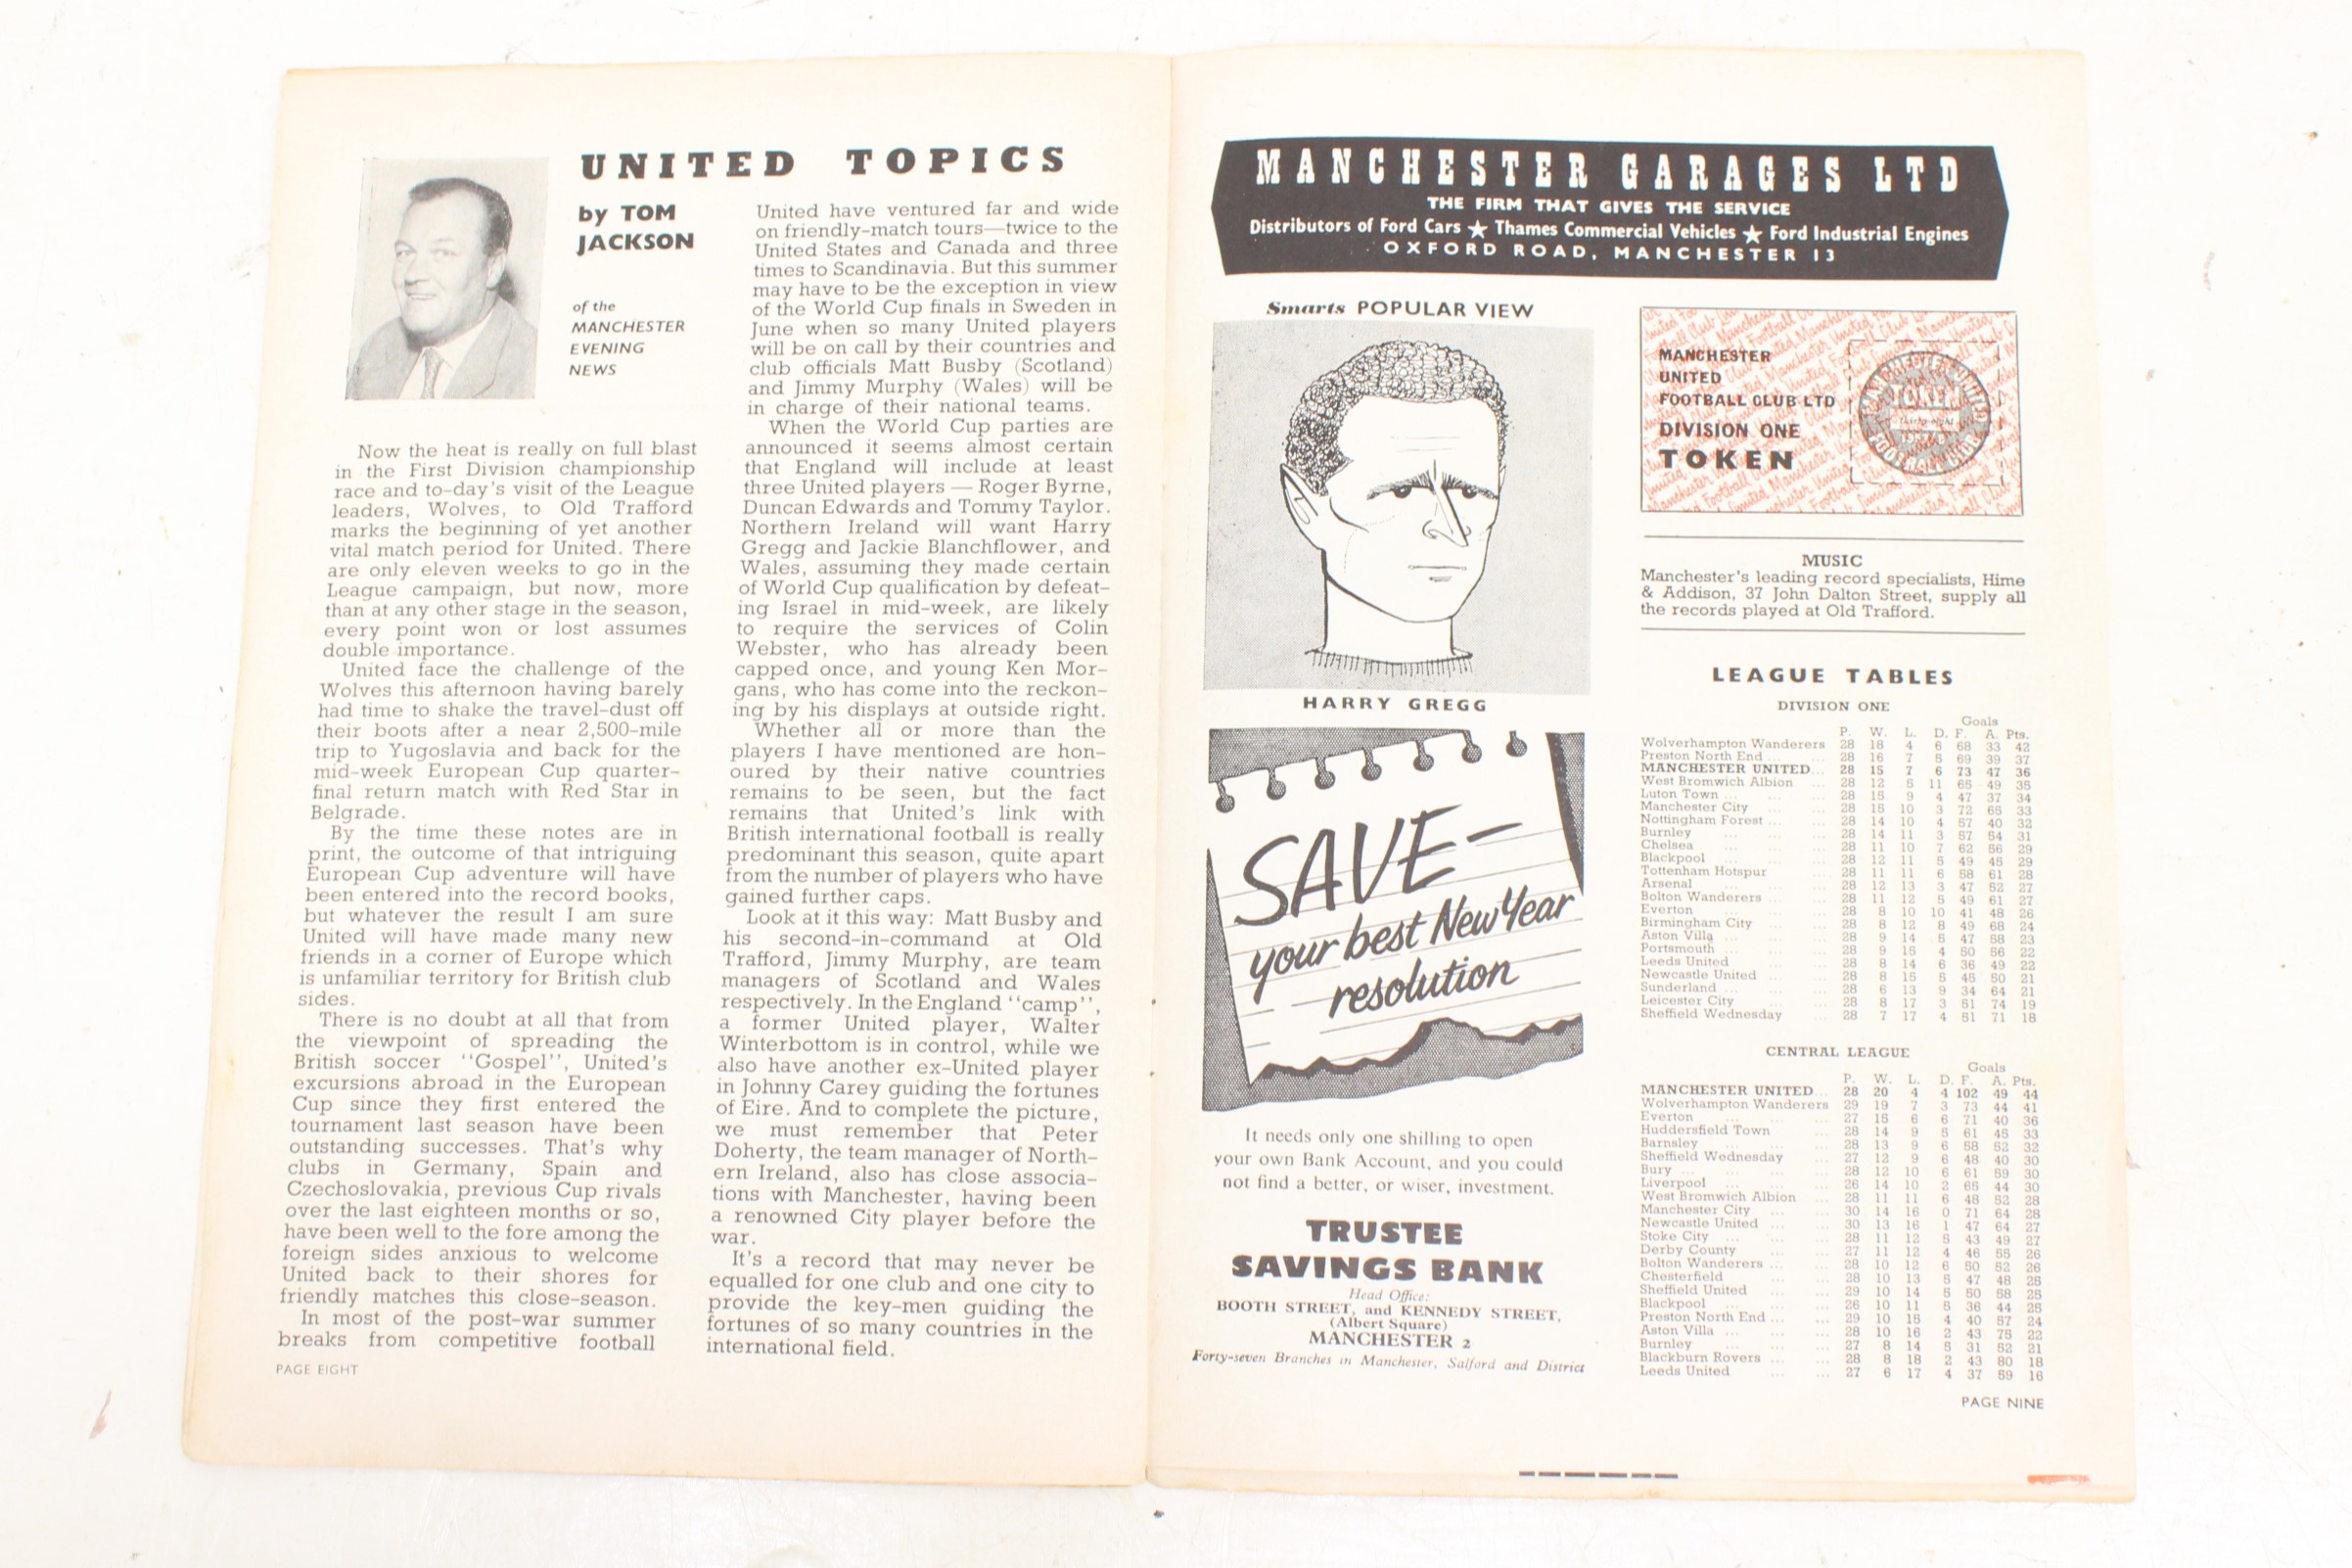 Manchester United: A rare Manchester United v Wolverhampton Wanderers, 8th February 1958 - Image 3 of 4